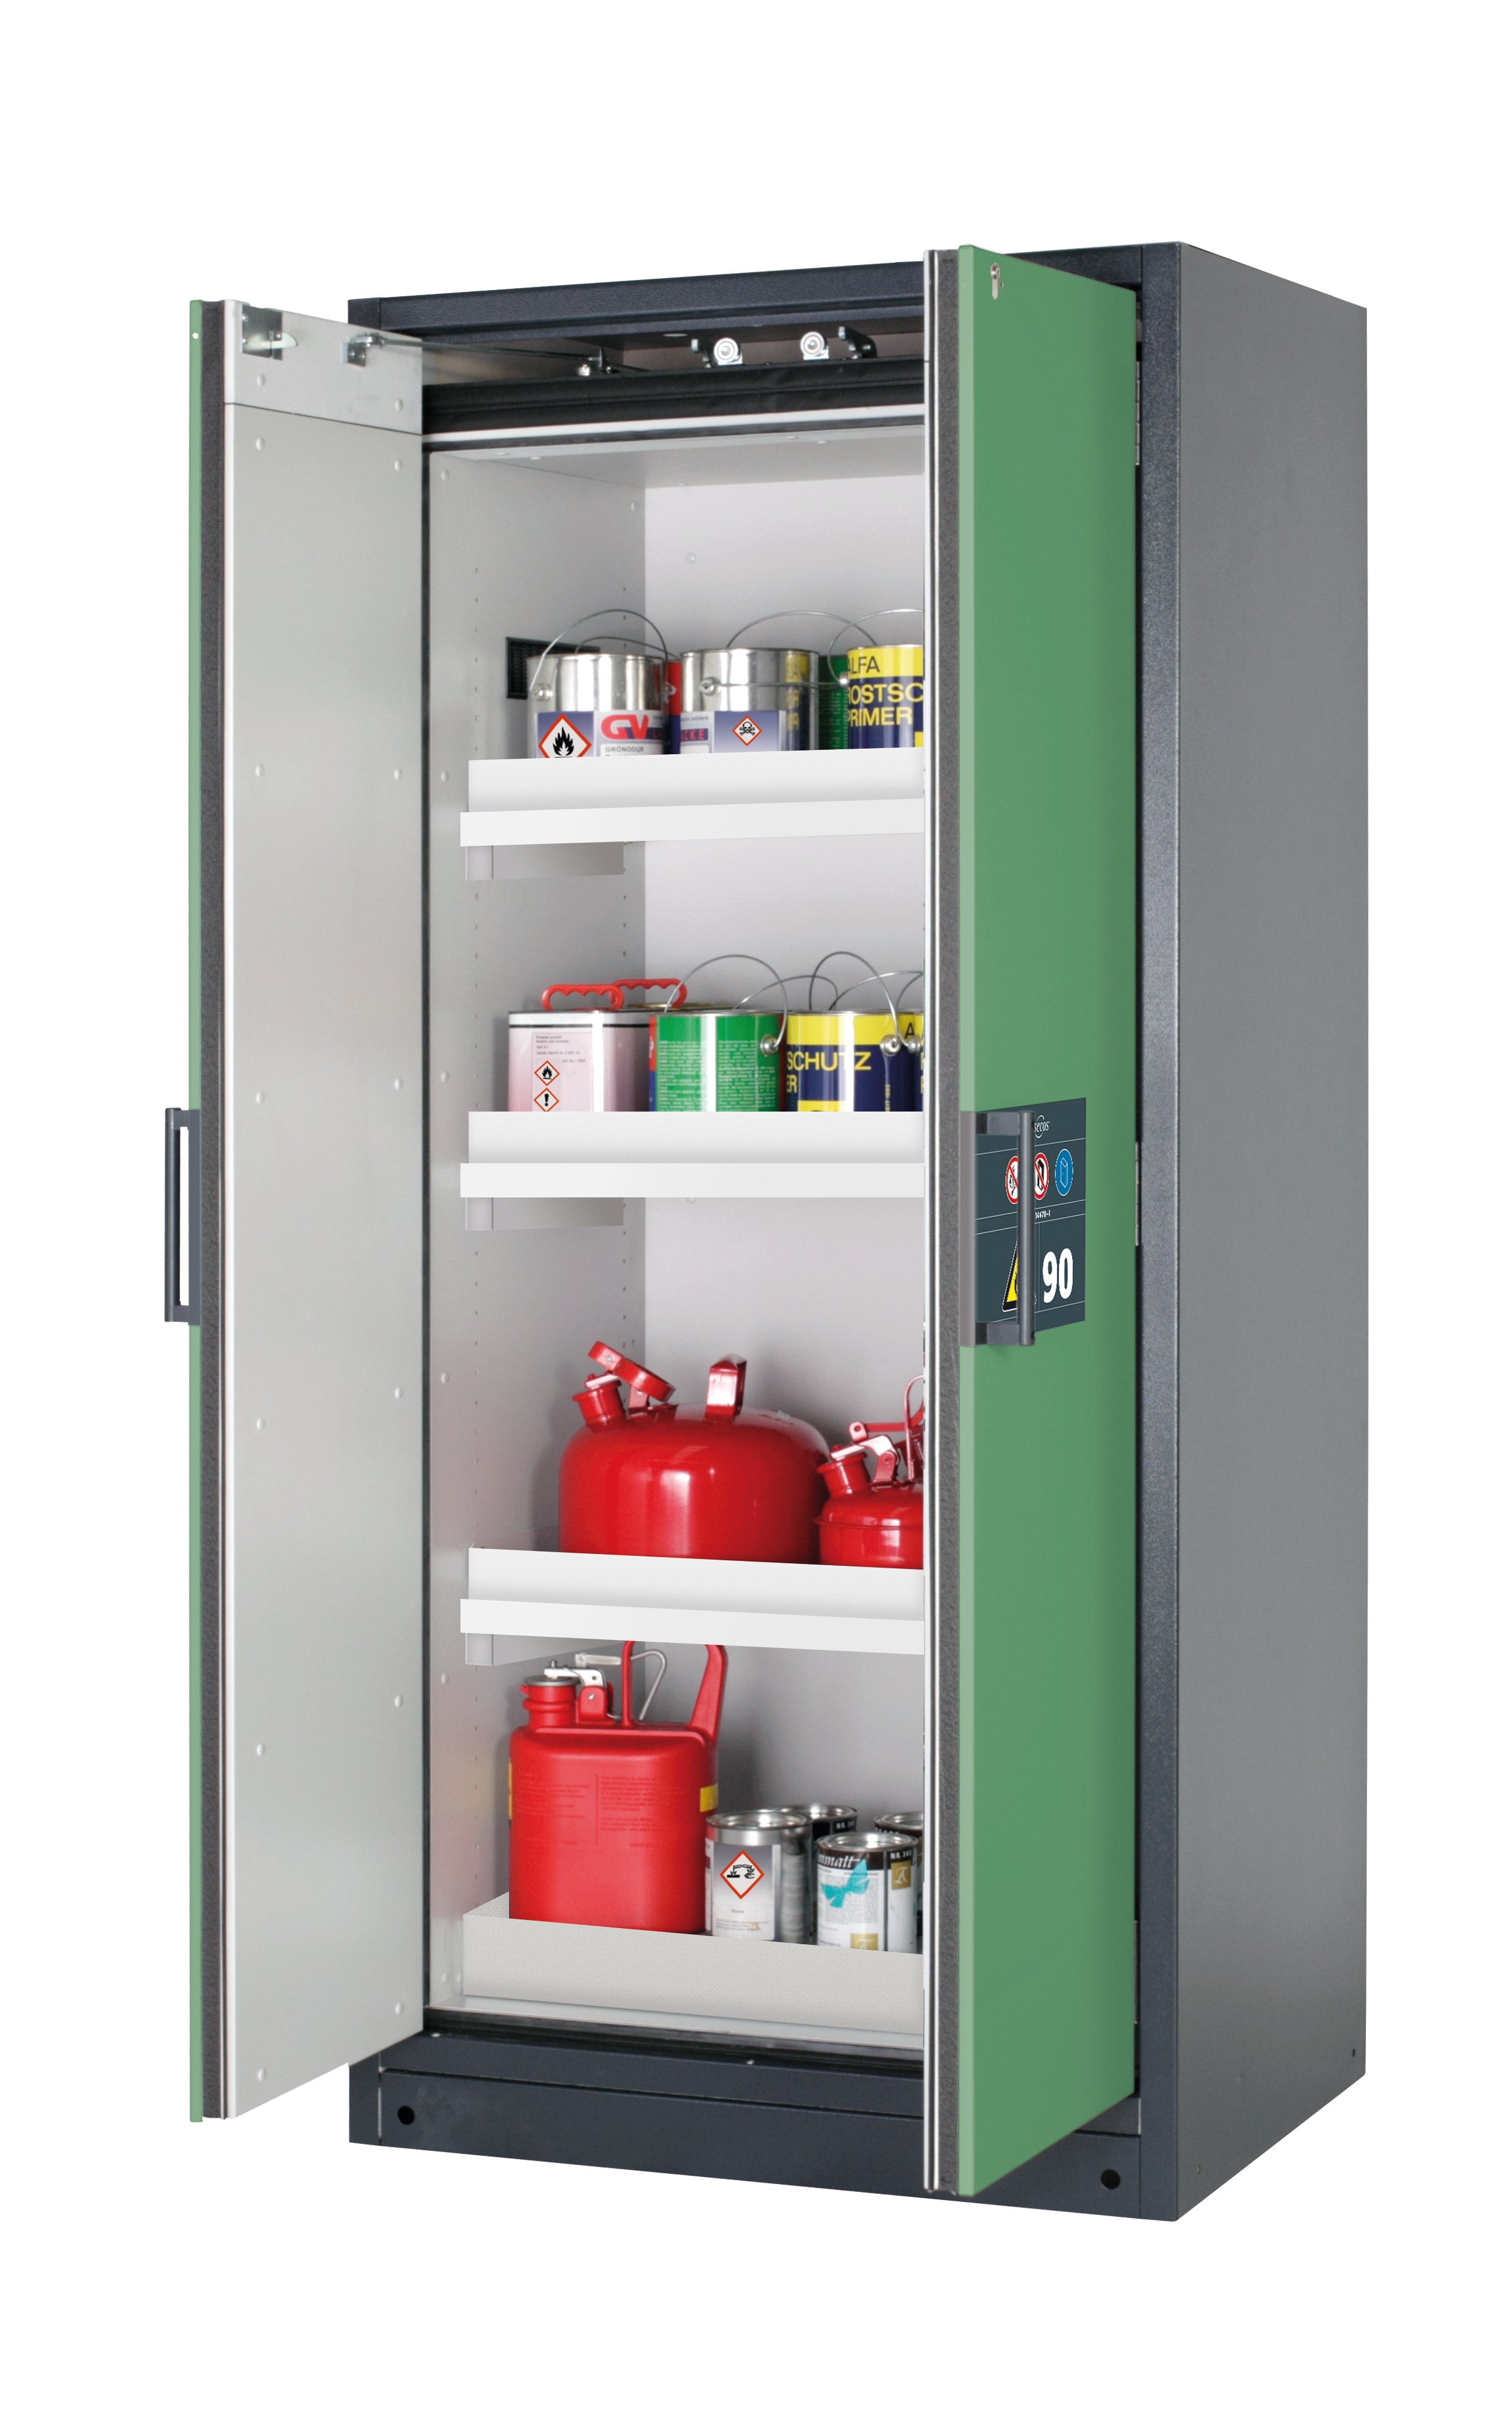 Type 90 safety storage cabinet Q-CLASSIC-90 model Q90.195.090 in reseda green RAL 6011 with 3x tray shelf (standard) (polypropylene),